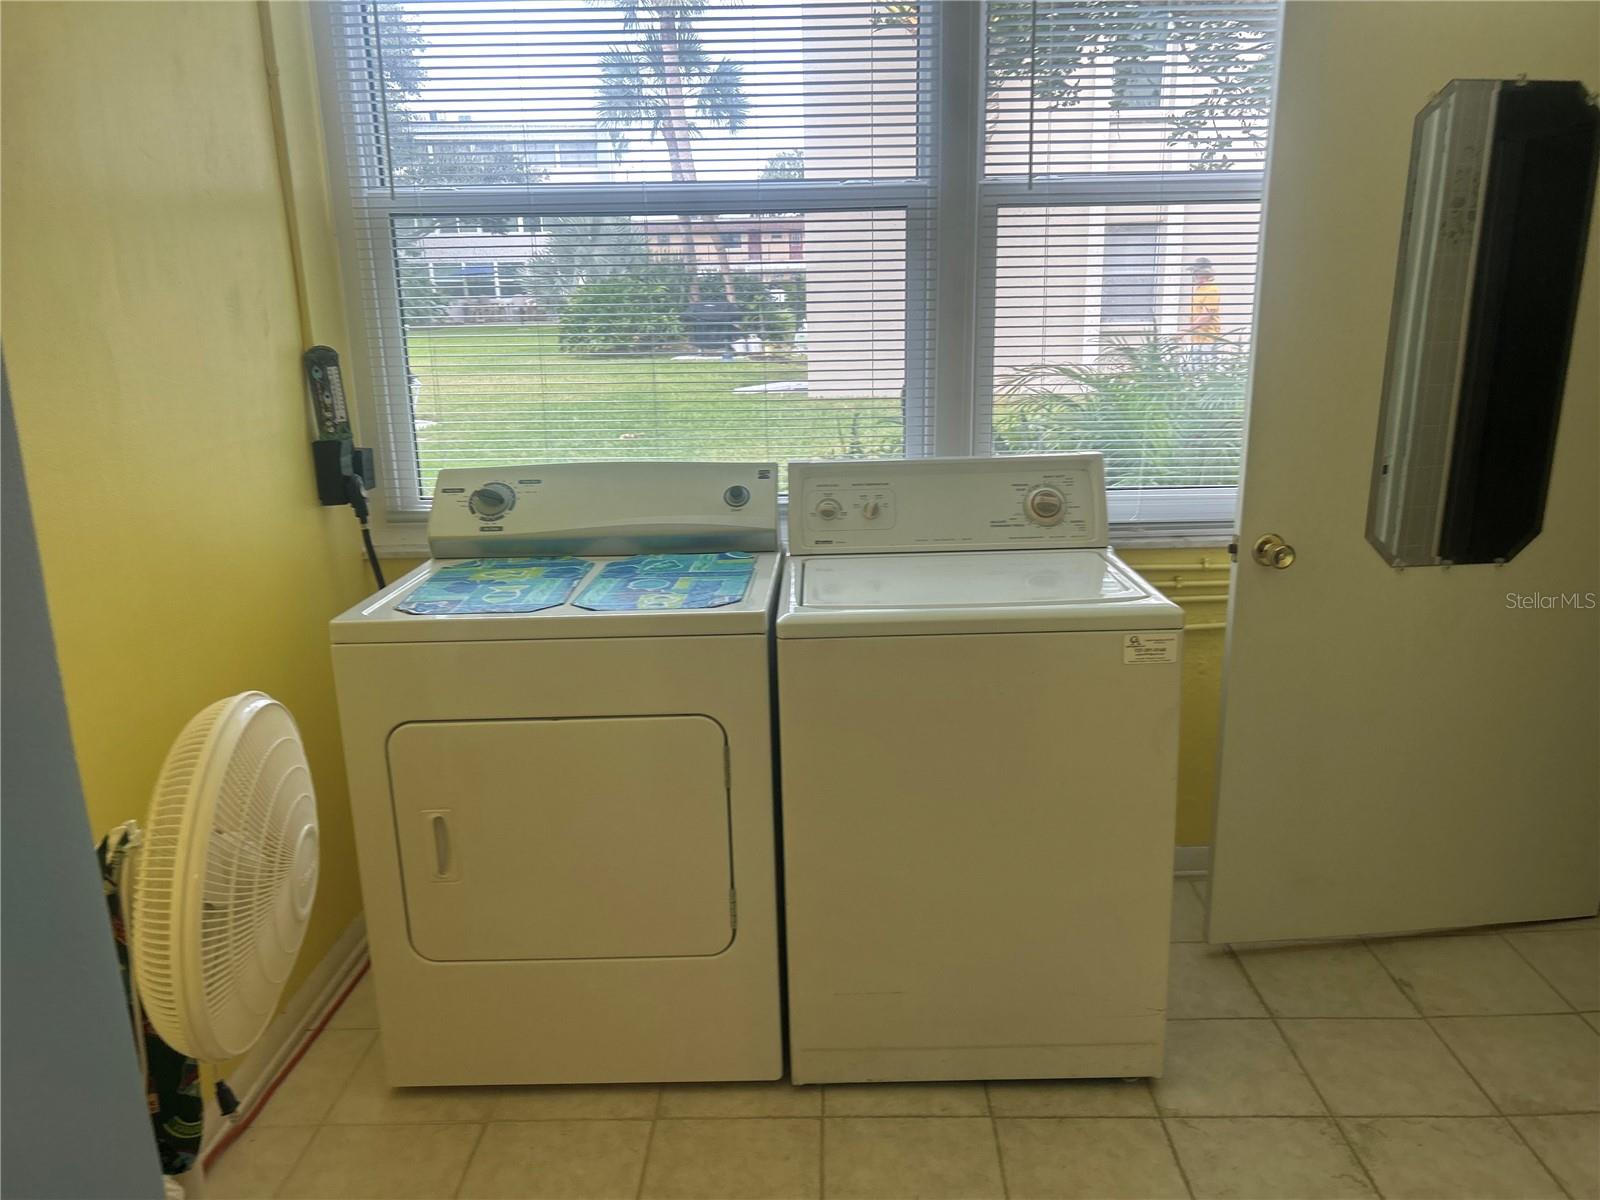 Inside full laundry, door leads to primary bath\.